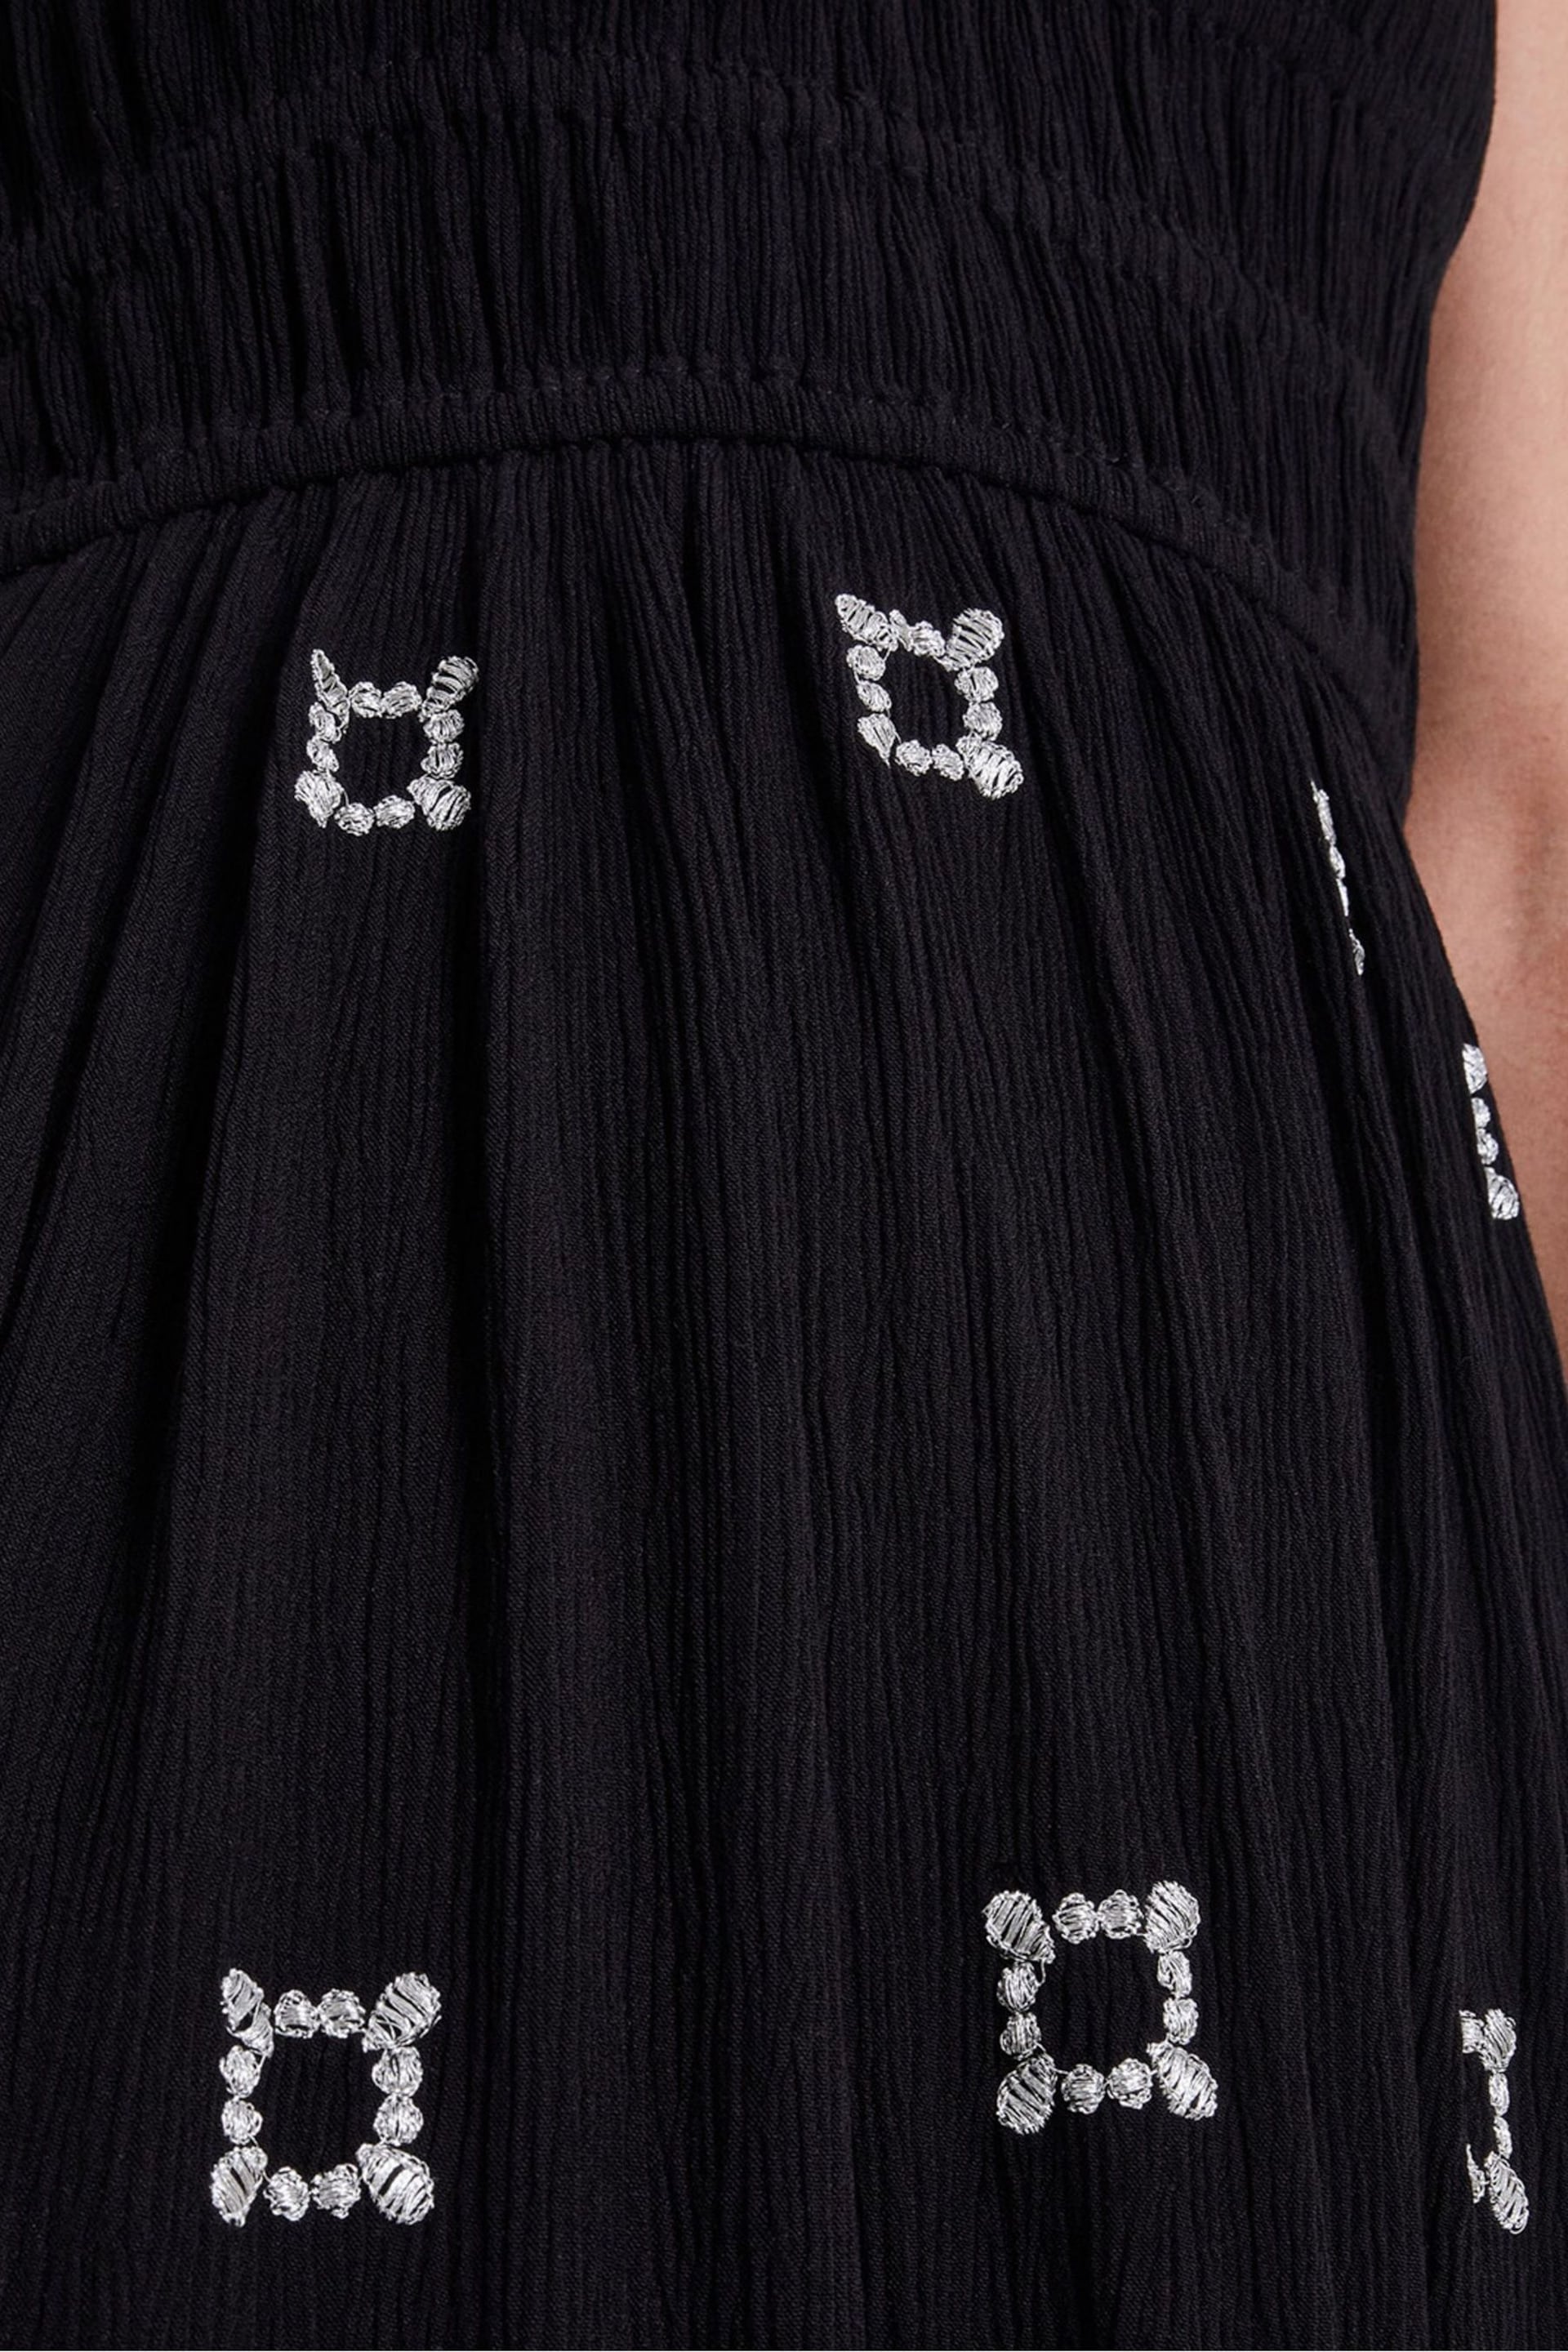 Monsoon Black Briar Embroidered Dress - Image 4 of 5